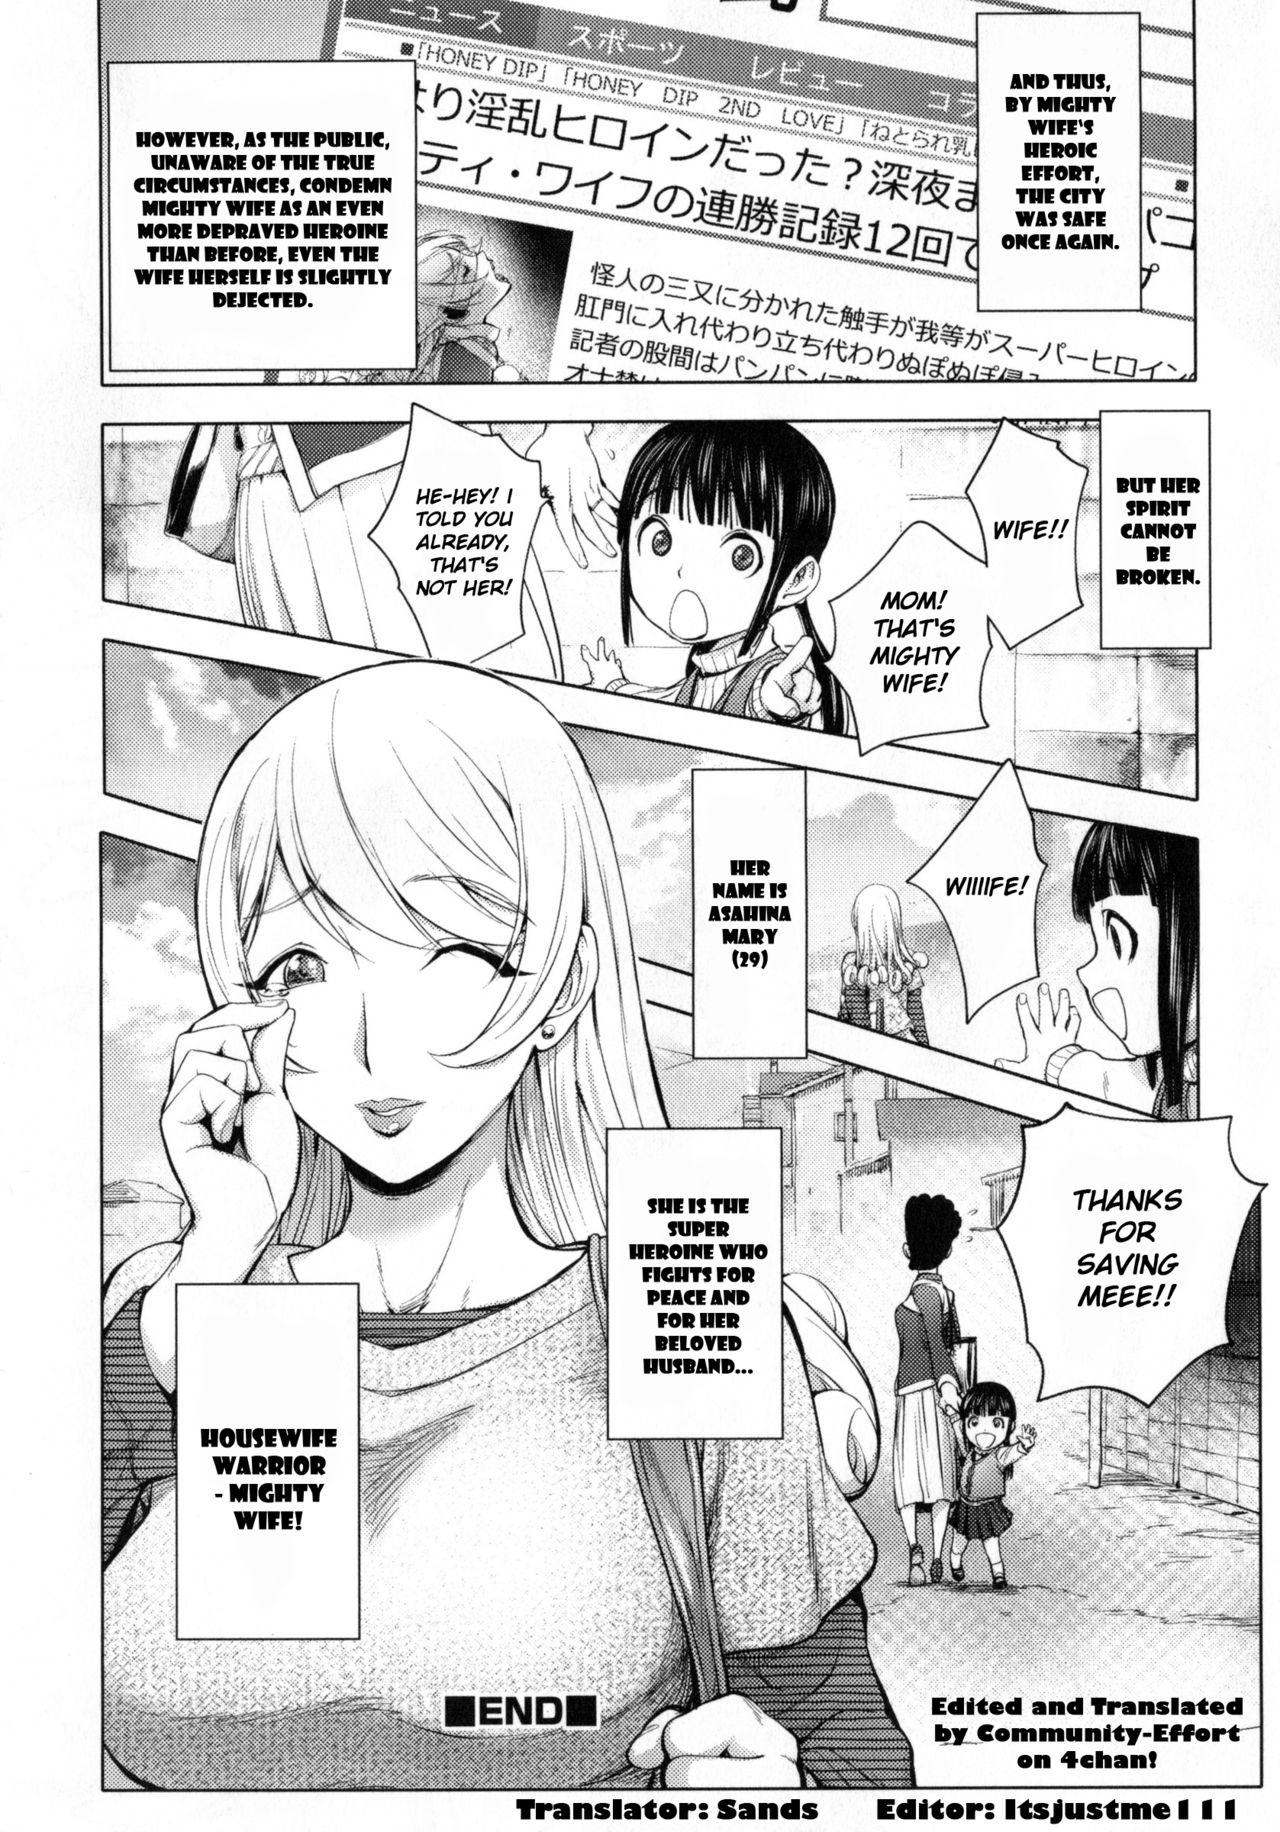 Gangbang Aisai Senshi Mighty Wife 8th | Beloved Housewife Warrior Mighty Wife 8th Solo Girl - Page 19